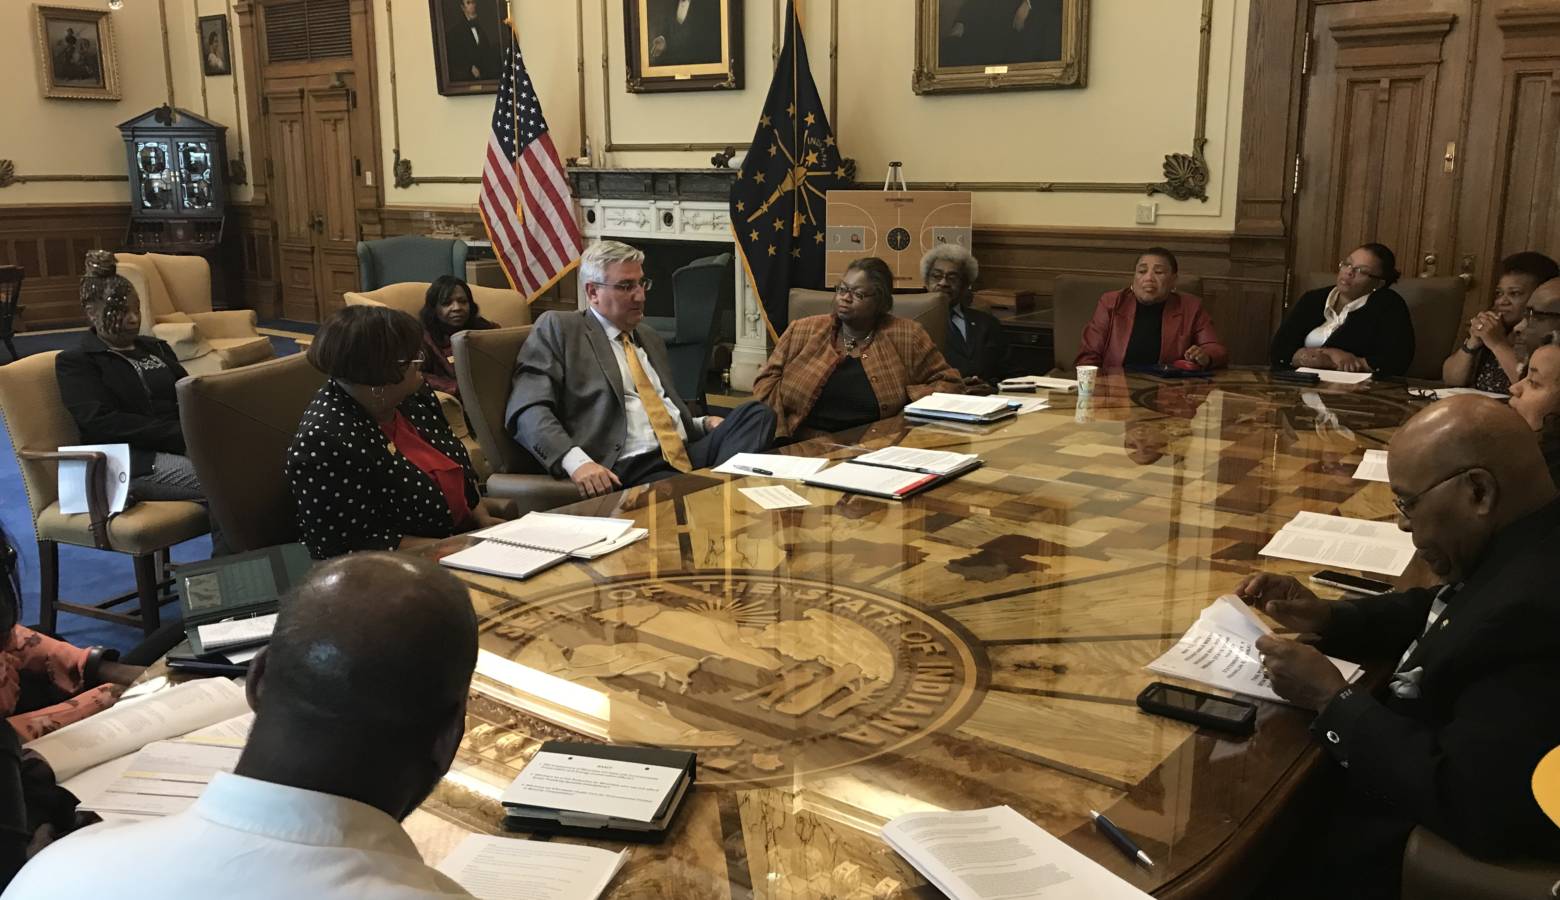 Governor Eric Holcomb met with members of the Indiana NAACP for a roundtable discussion on Monday (Provided by Indiana NAACP)